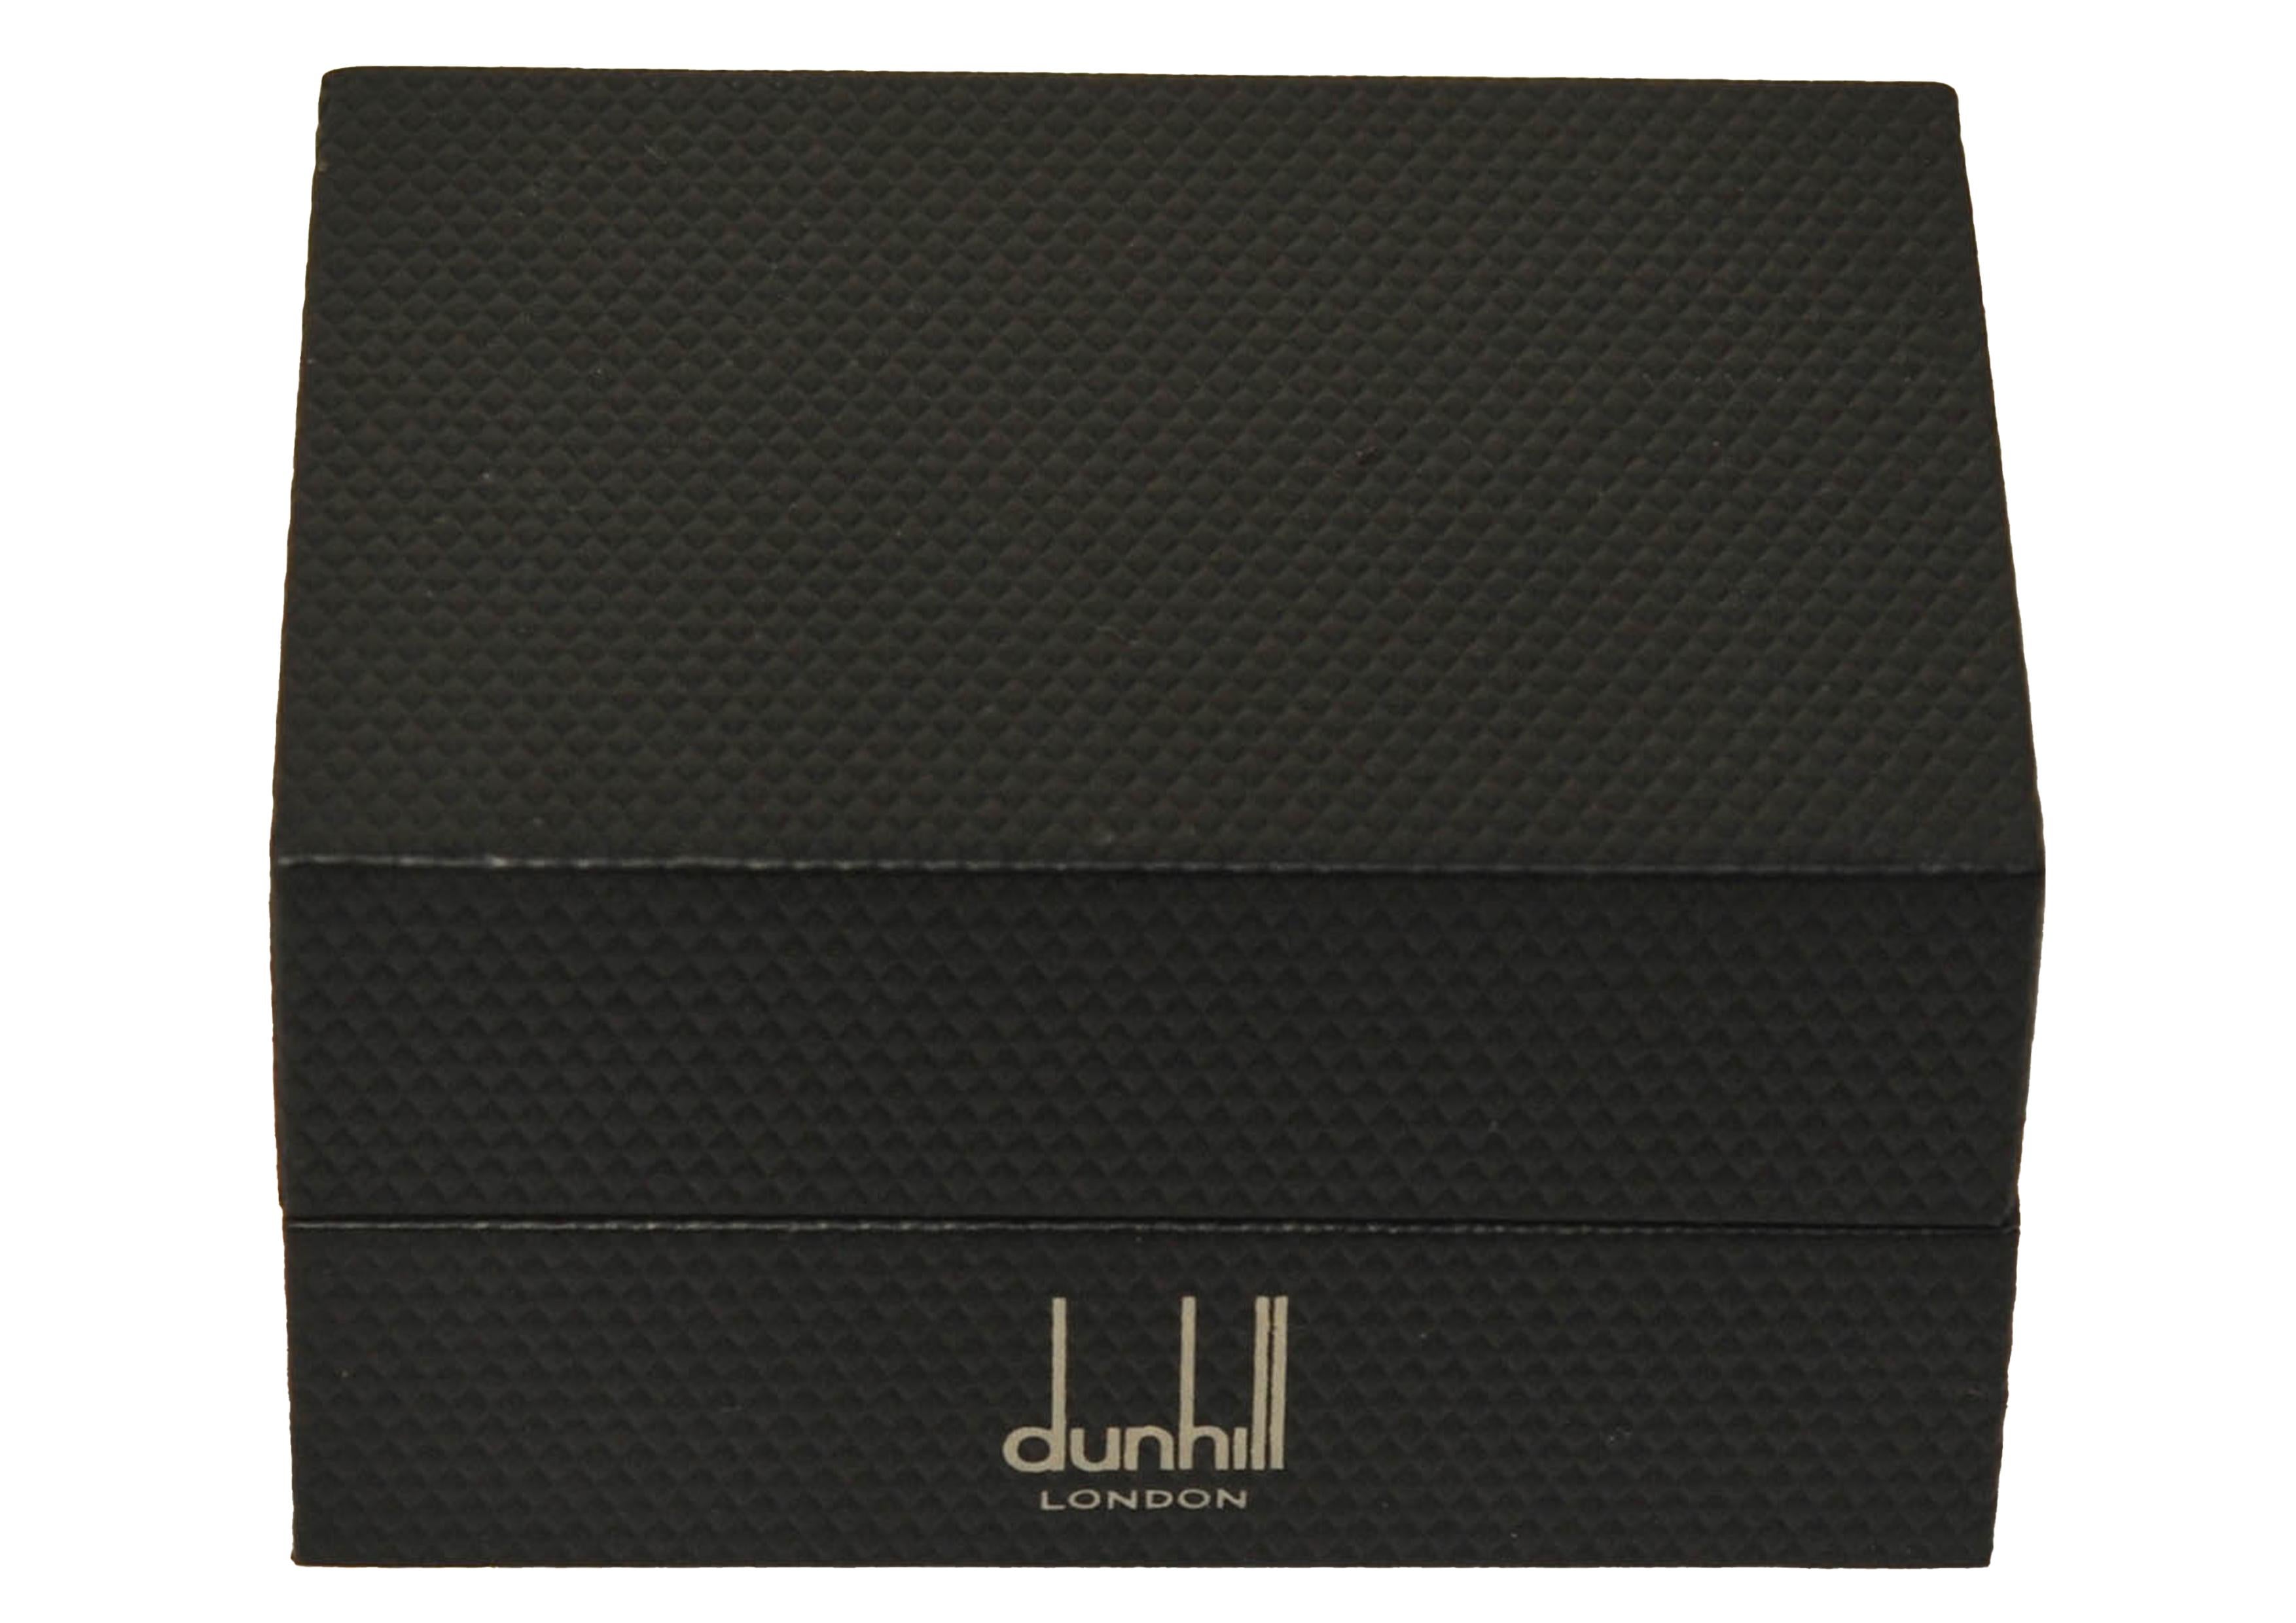 Dunhill of London Sterling Silver & Onyx Cufflinks in Original Dunhill Box  For Sale 6